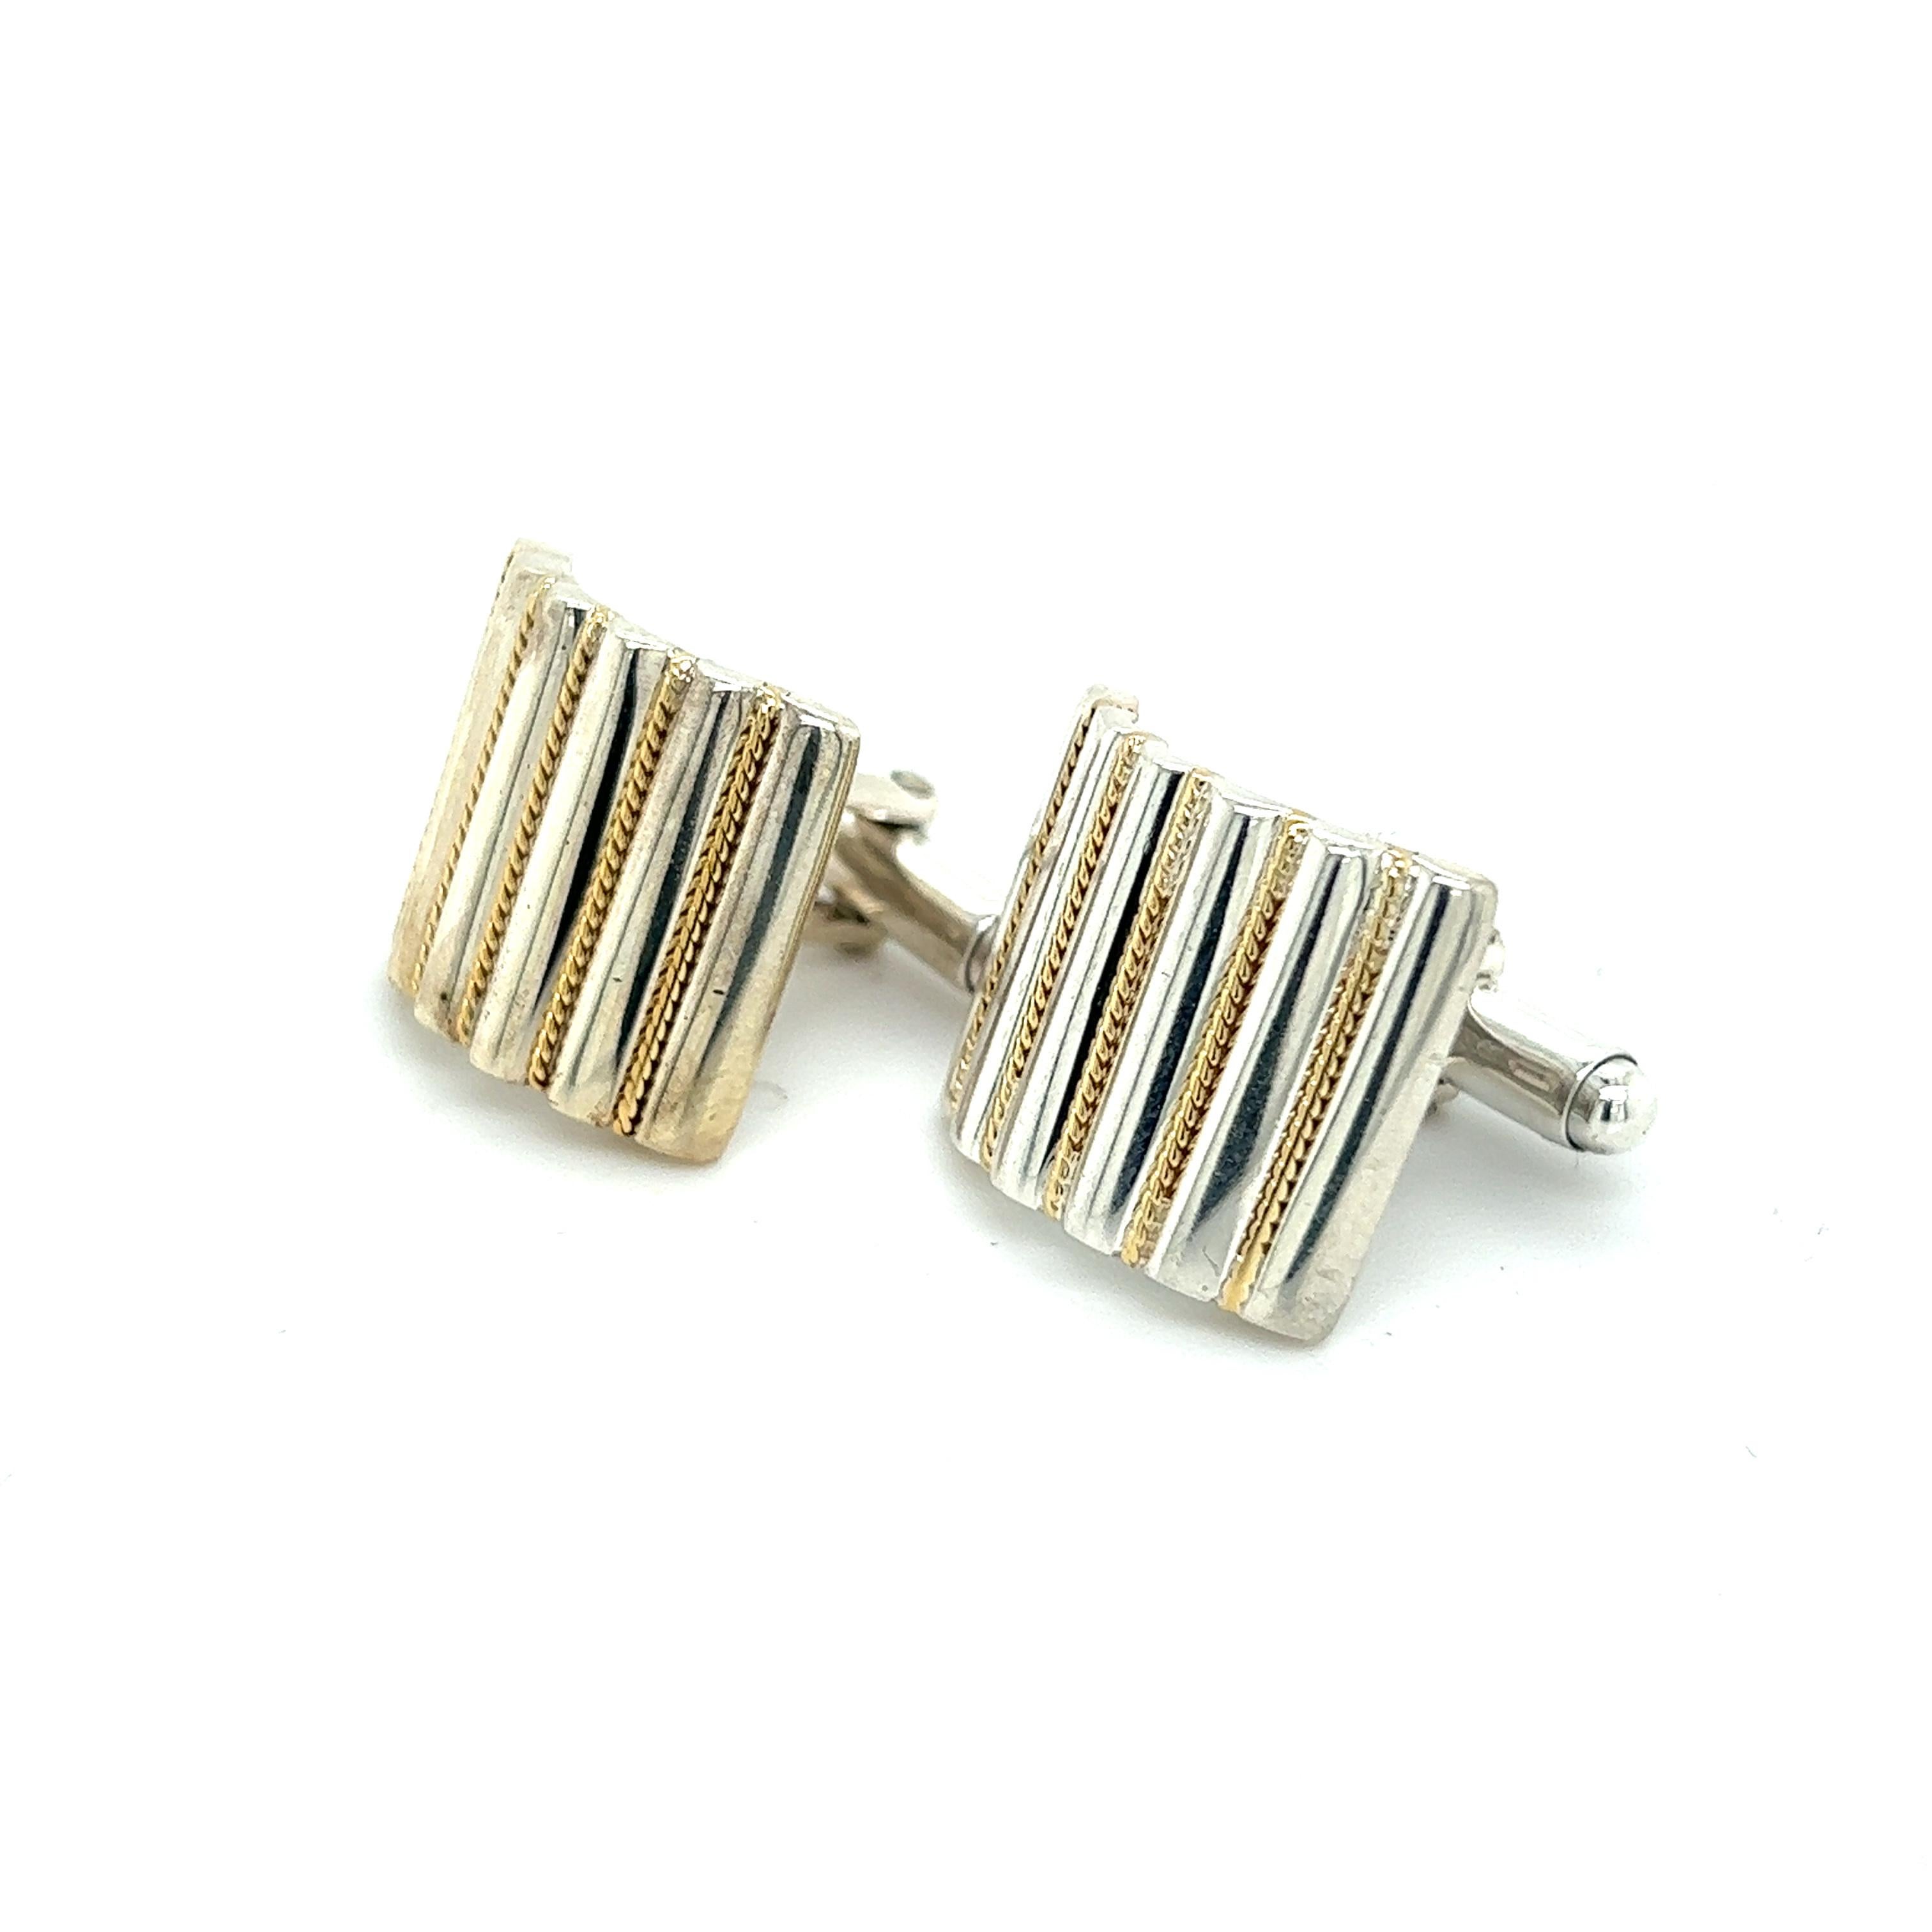 Authentic Tiffany & Co Estate Cufflinks 18k YG + Sterling Silver TIF370

These elegant Authentic Tiffany & Co Men's Cufflinks are made of sterling silver and gold have a weight of 12.52 grams.

TRUSTED SELLER SINCE 2002

PLEASE SEE OUR HUNDREDS OF